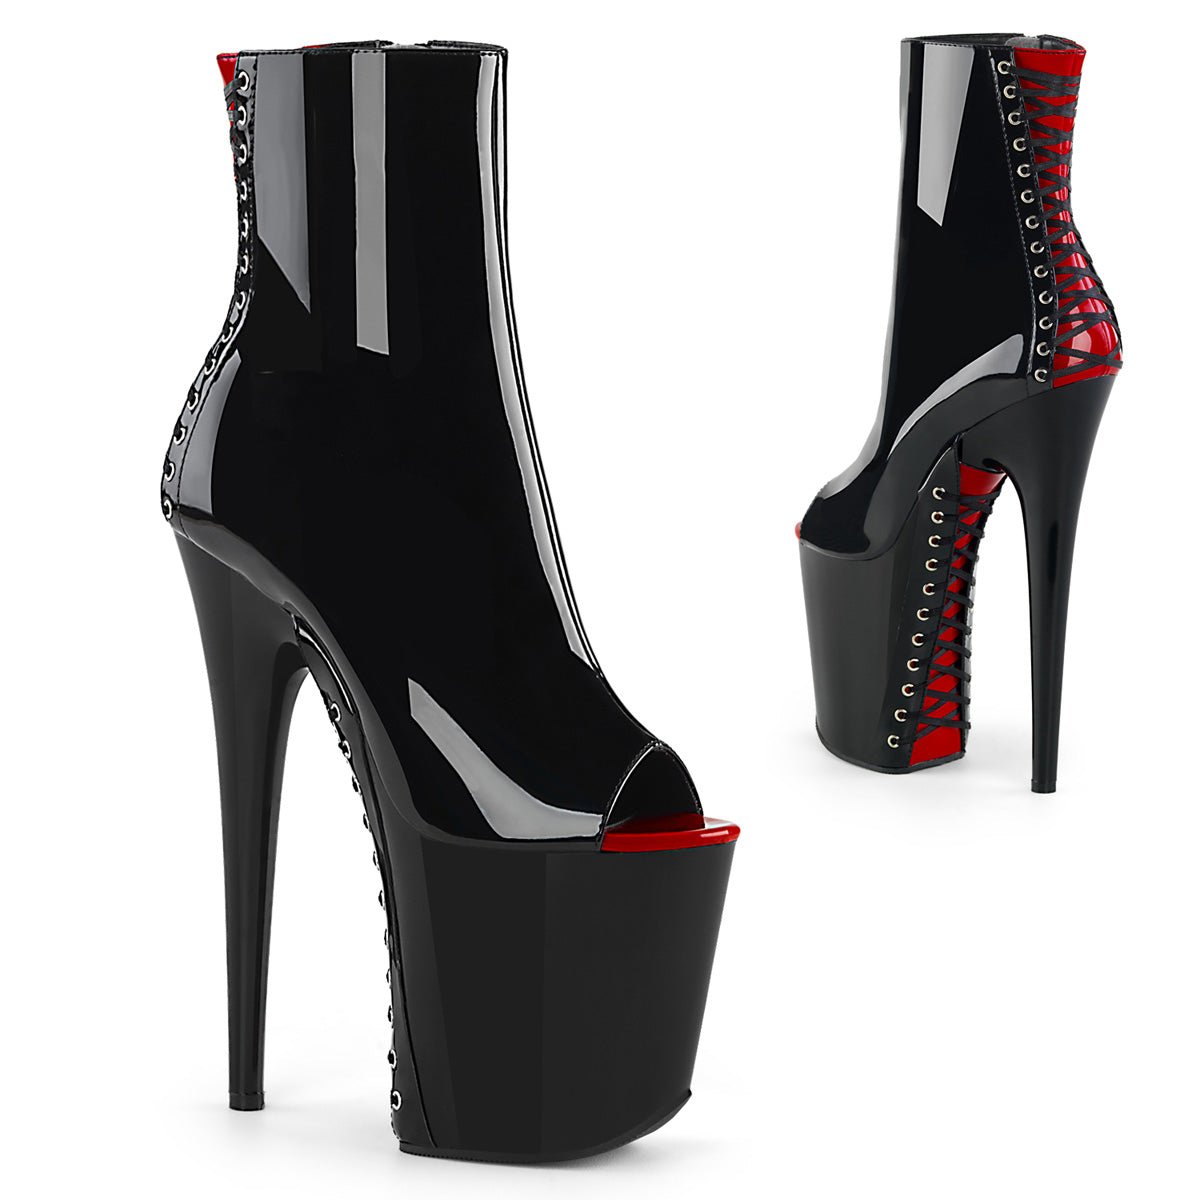 Clearance Pleaser Flamingo 1025 Black/Red Size 5UK/8USA - From Clearance Sold By Alternative Footwear